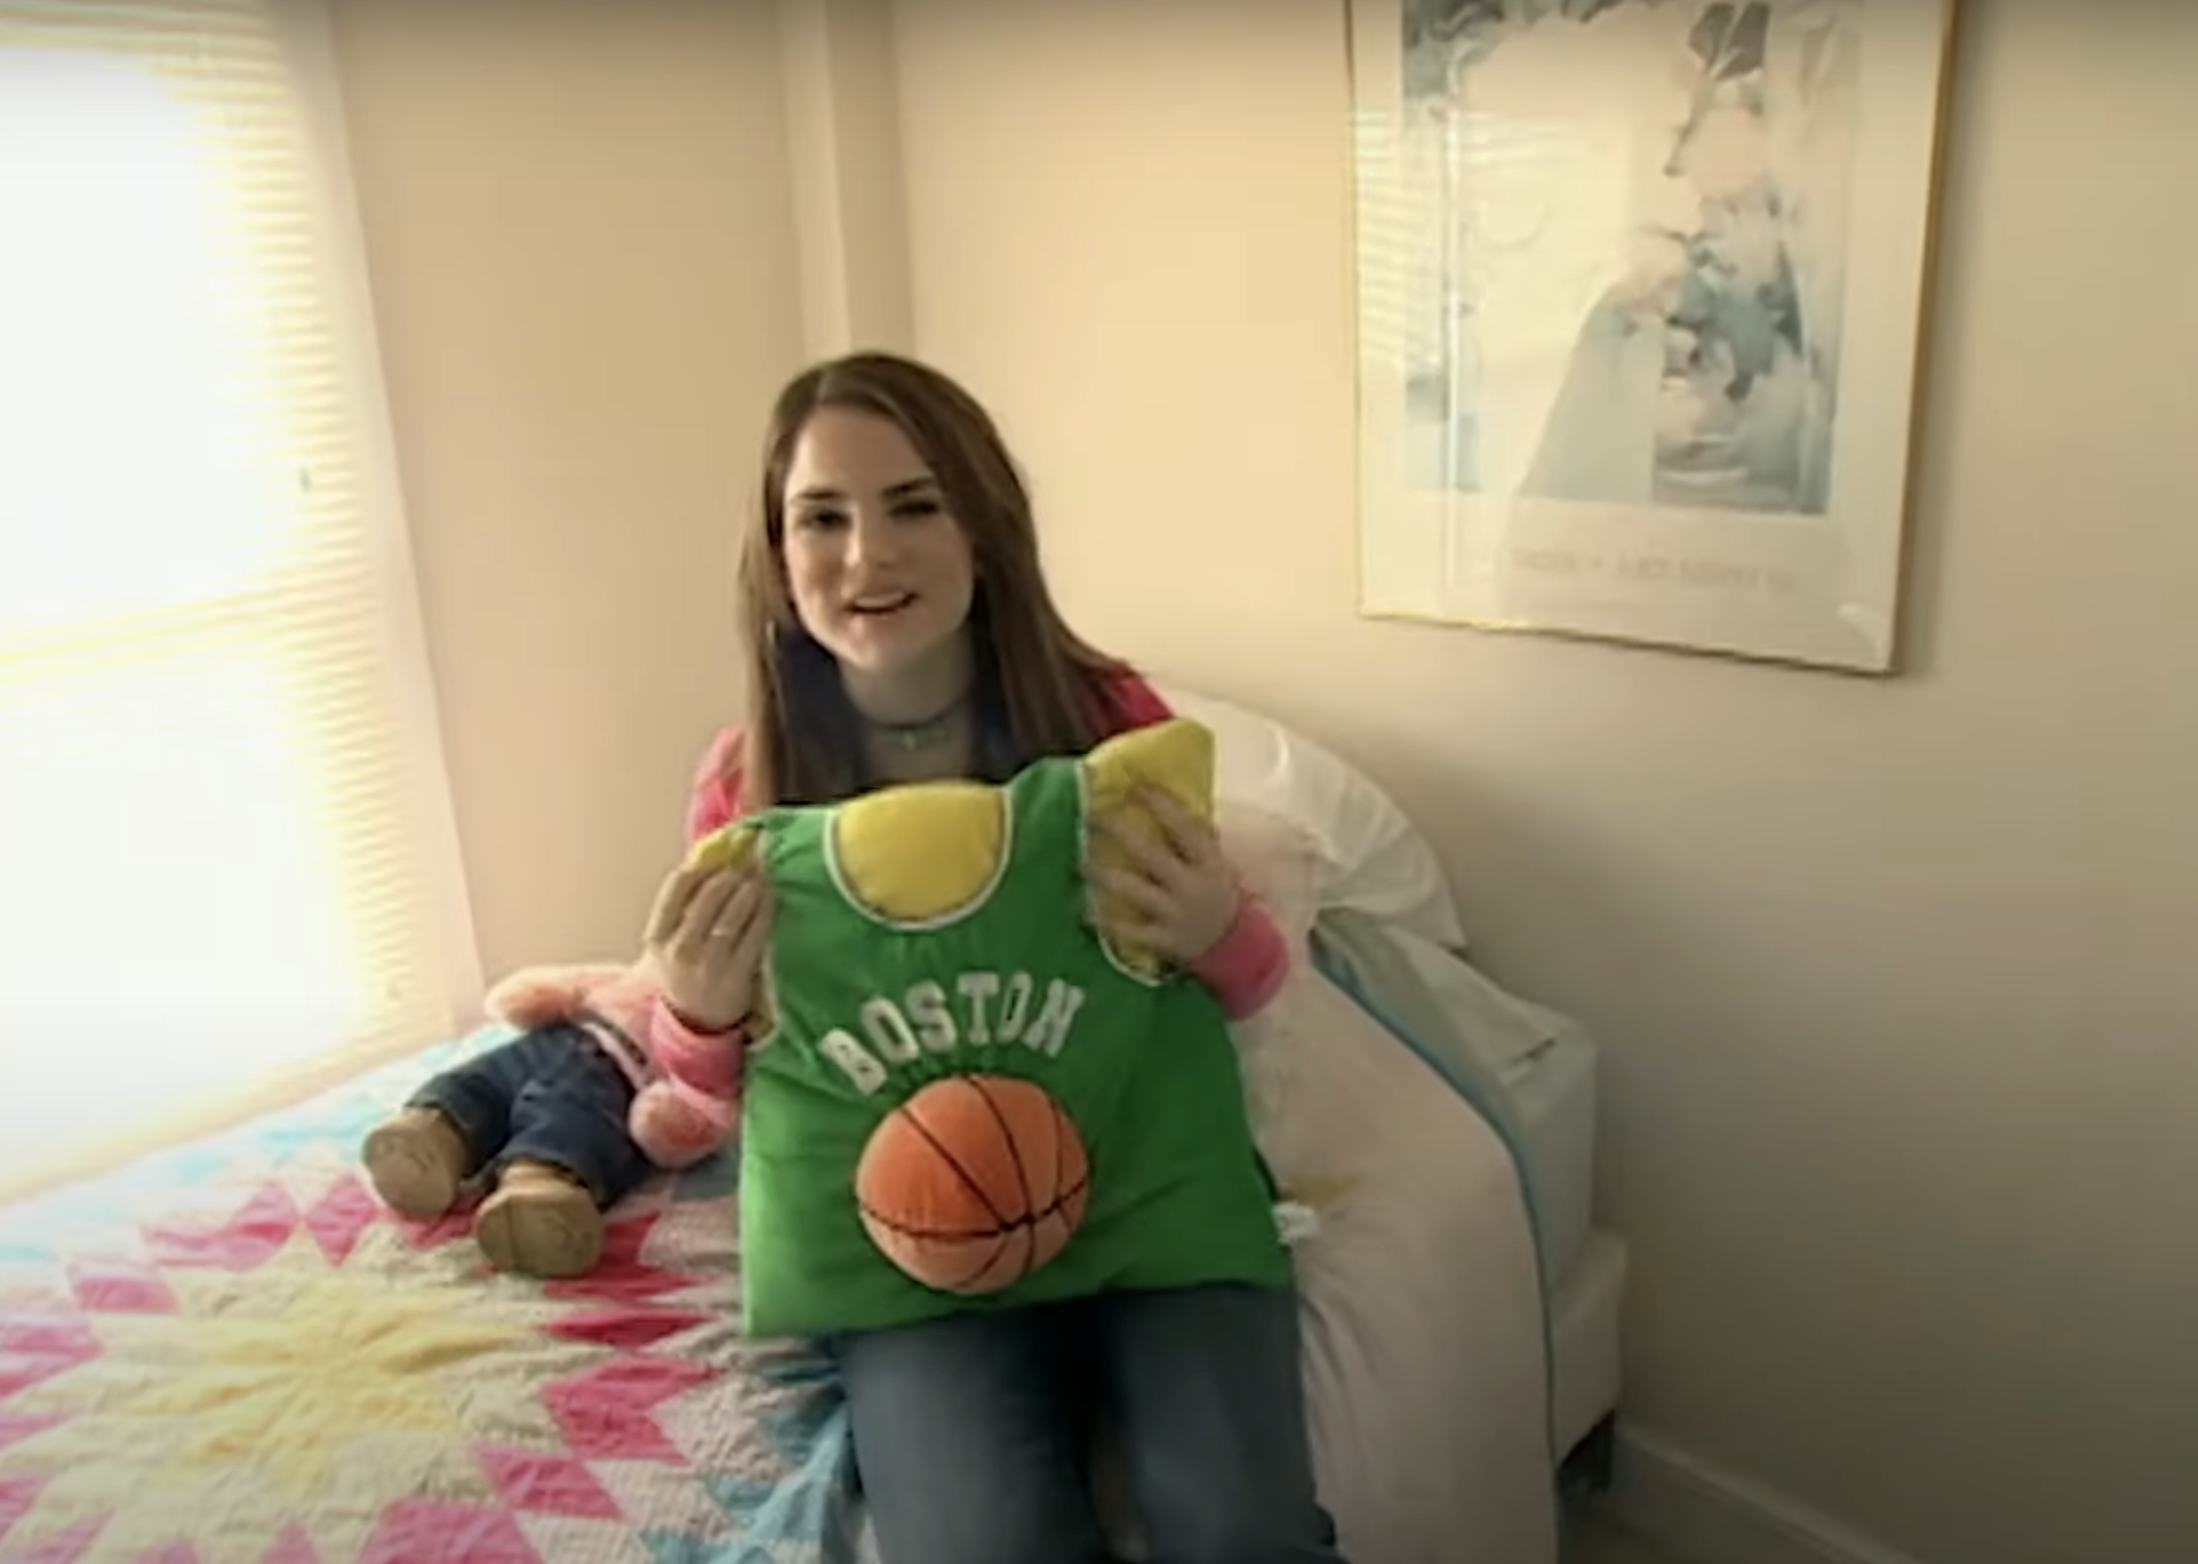 JoJo sitting on bed holding a sports-themed pillow, with stuffed toys behind her